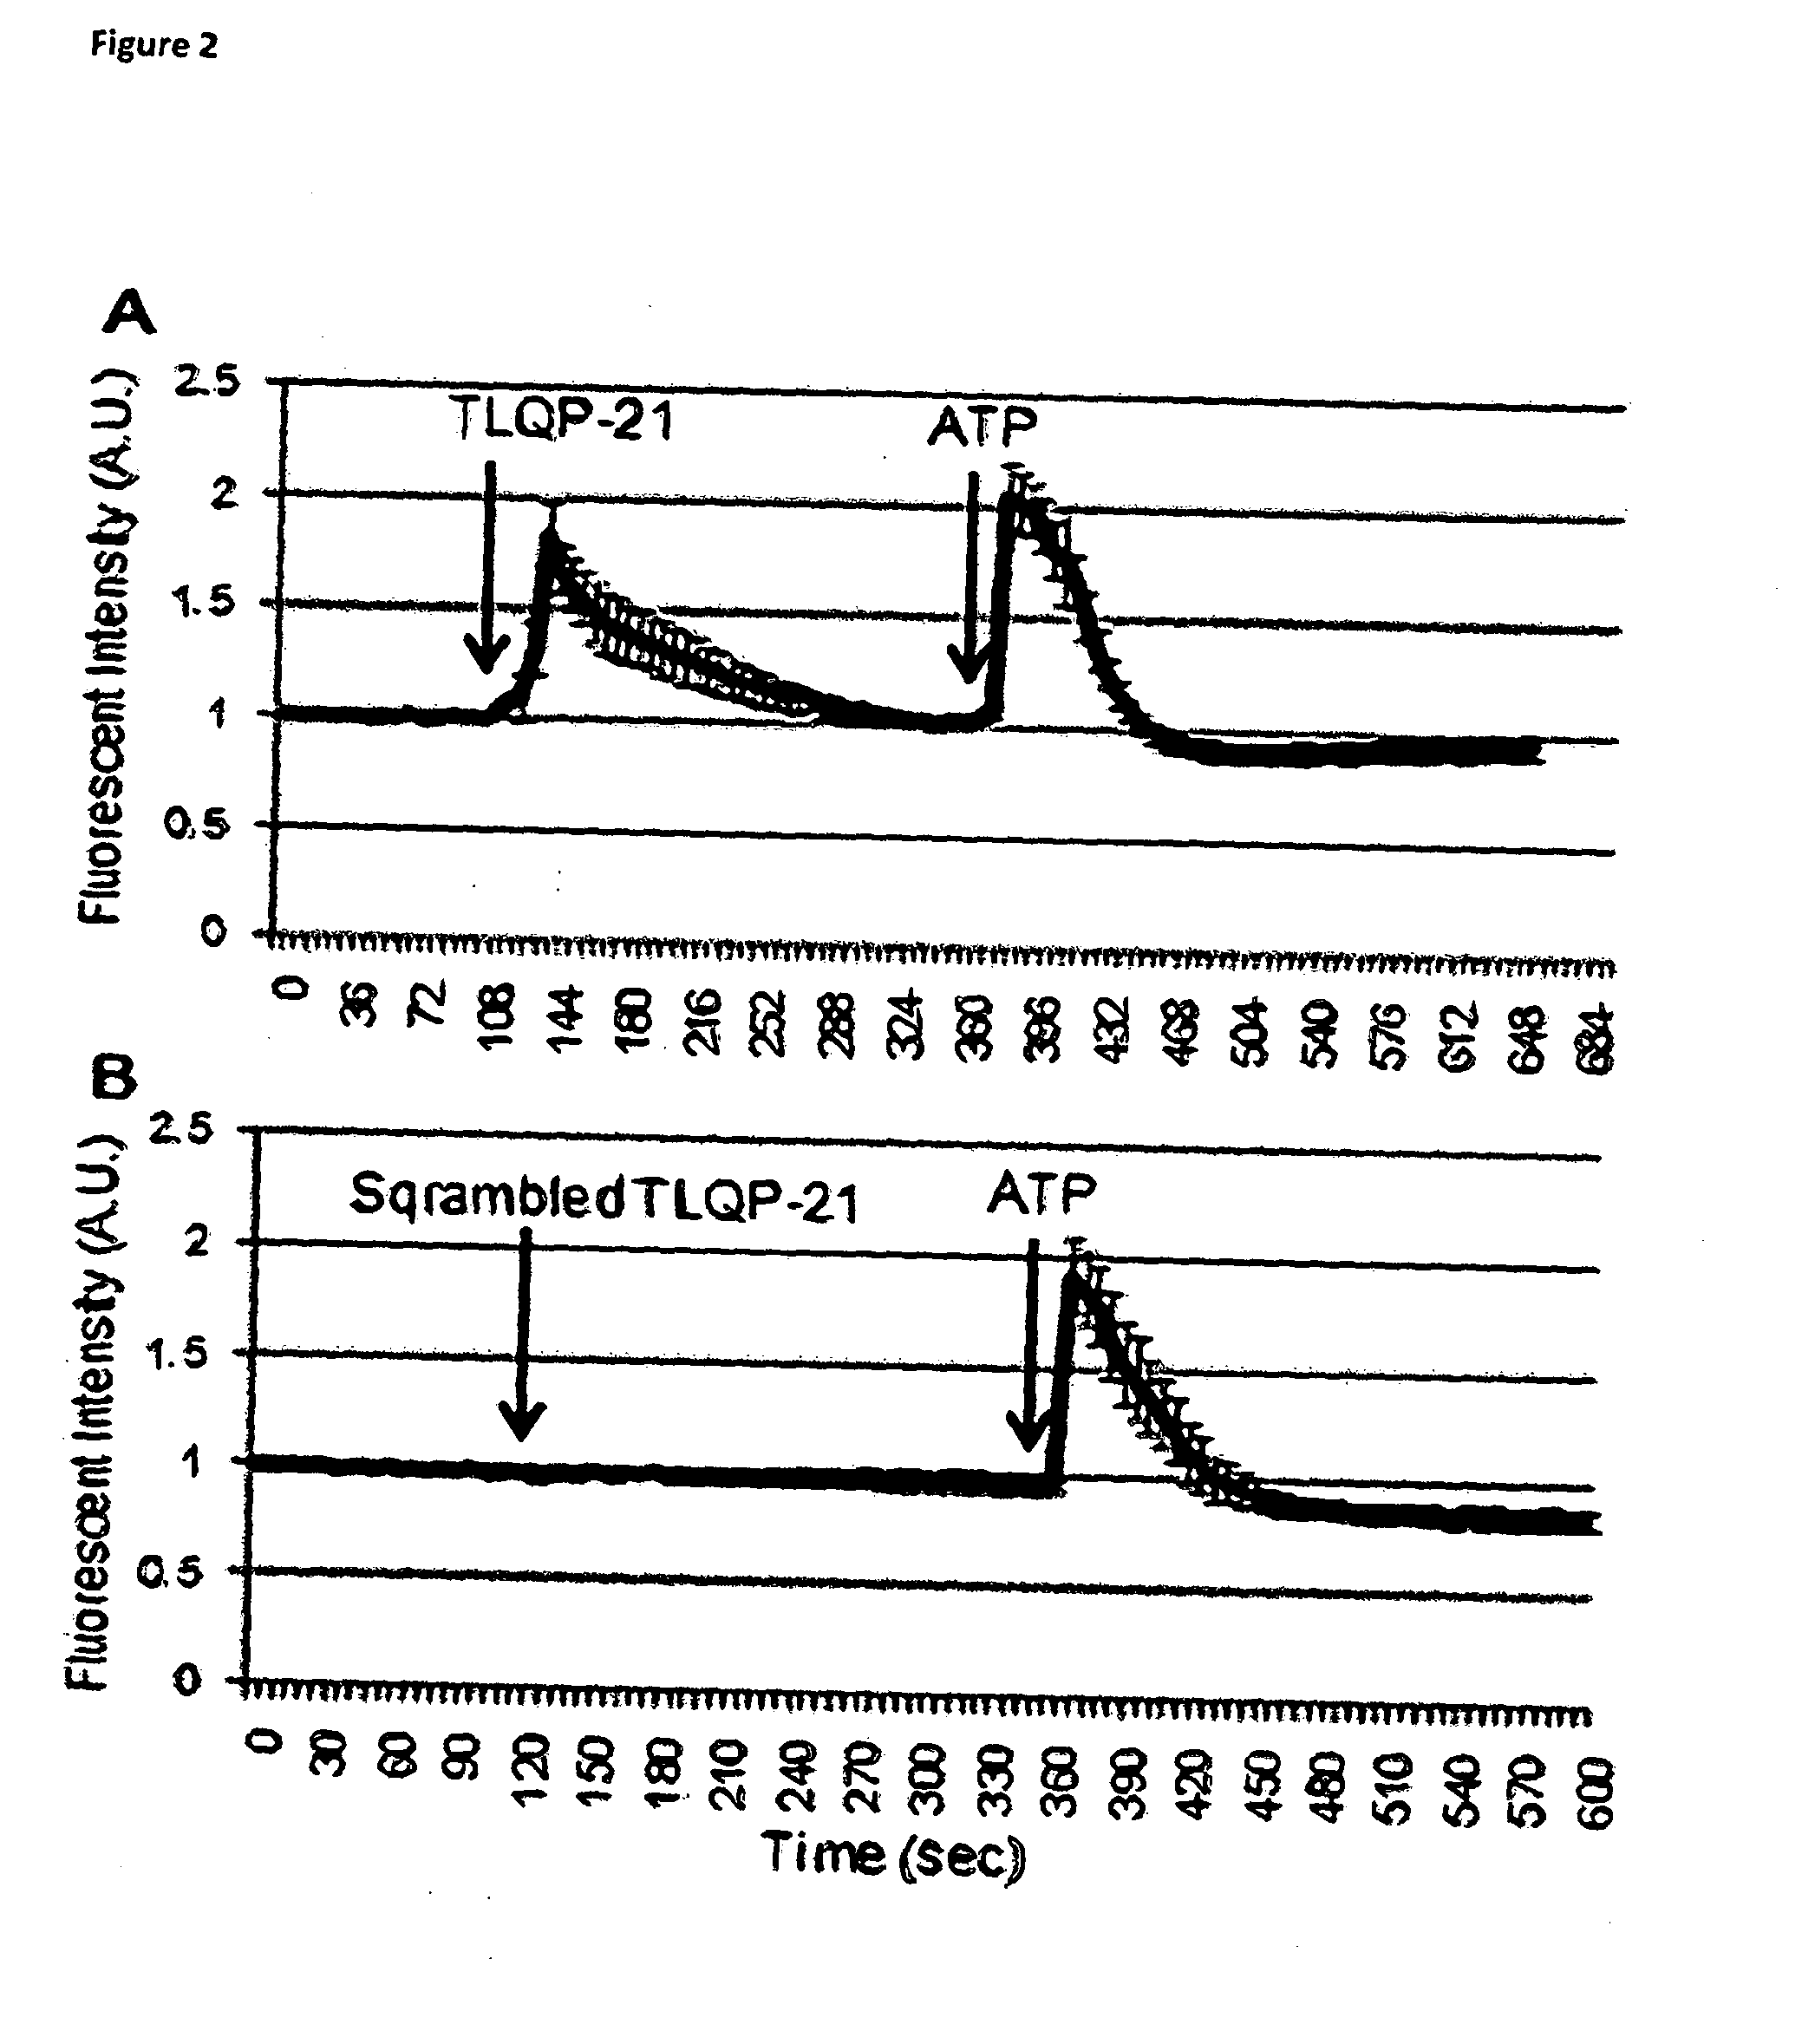 Methods of Treating Pain by Inhibition of VGF Activity